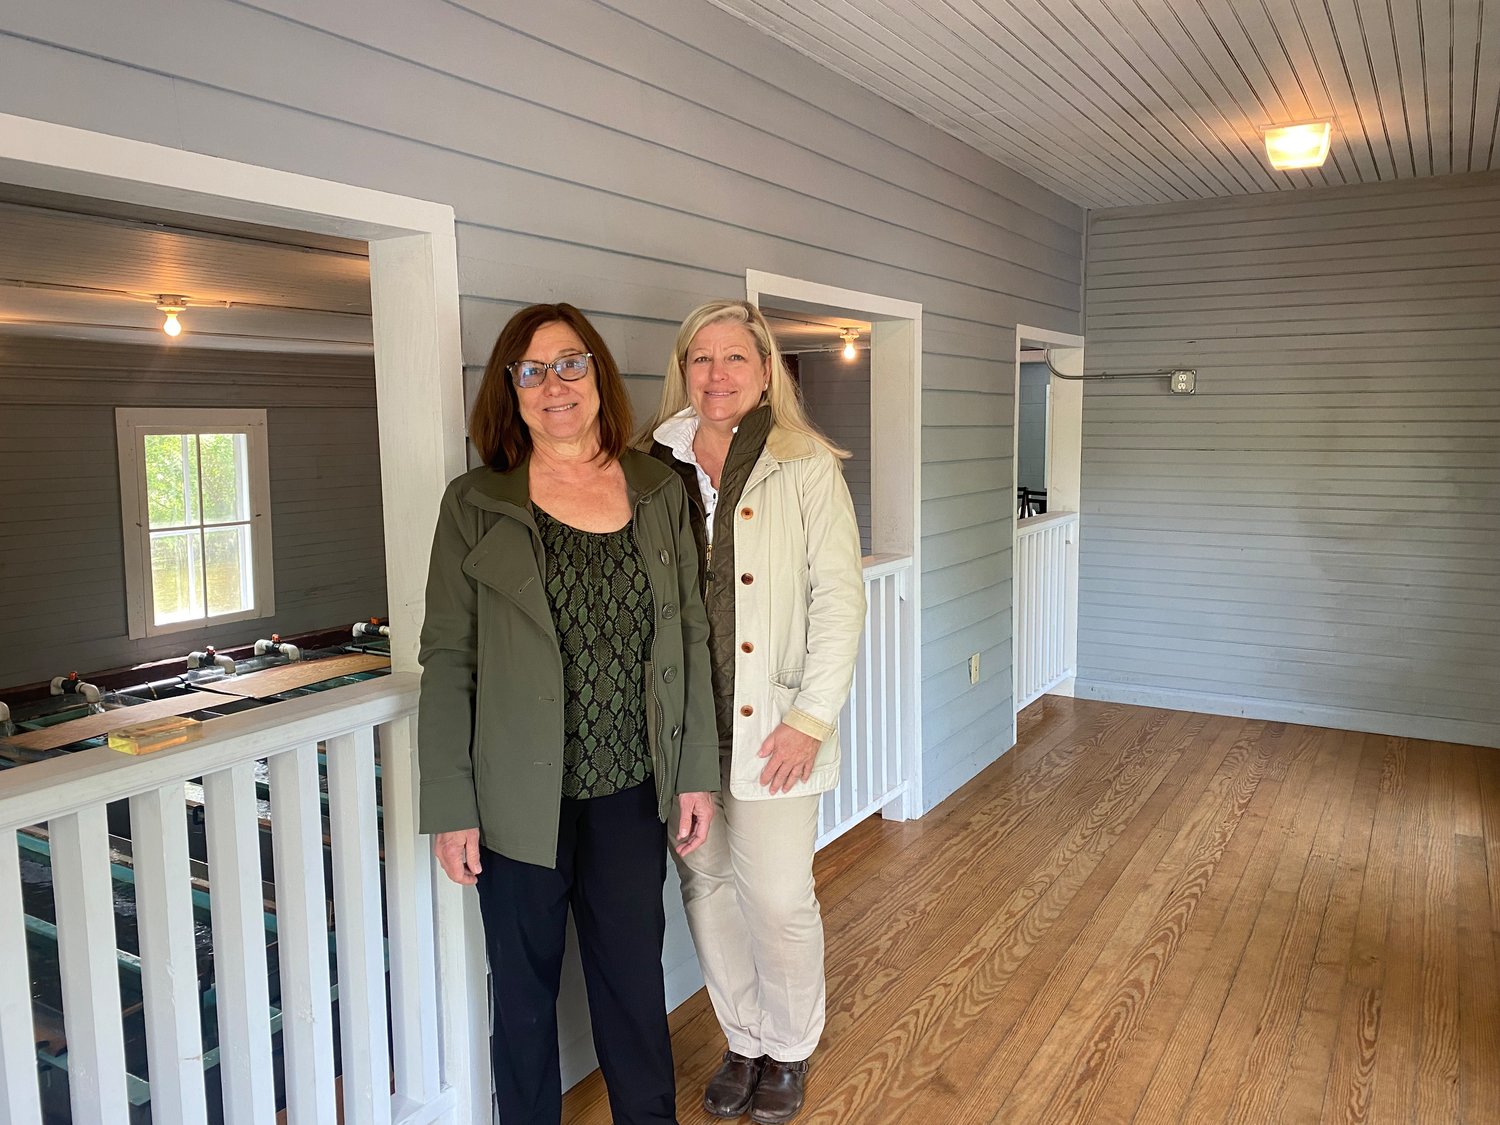 President of the Friends of Connetquot Janet Marie Soley and park manager Susanne Wuehler stand in the observation deck of the historic hatchery building that will be turned into an environmental interpretive center.